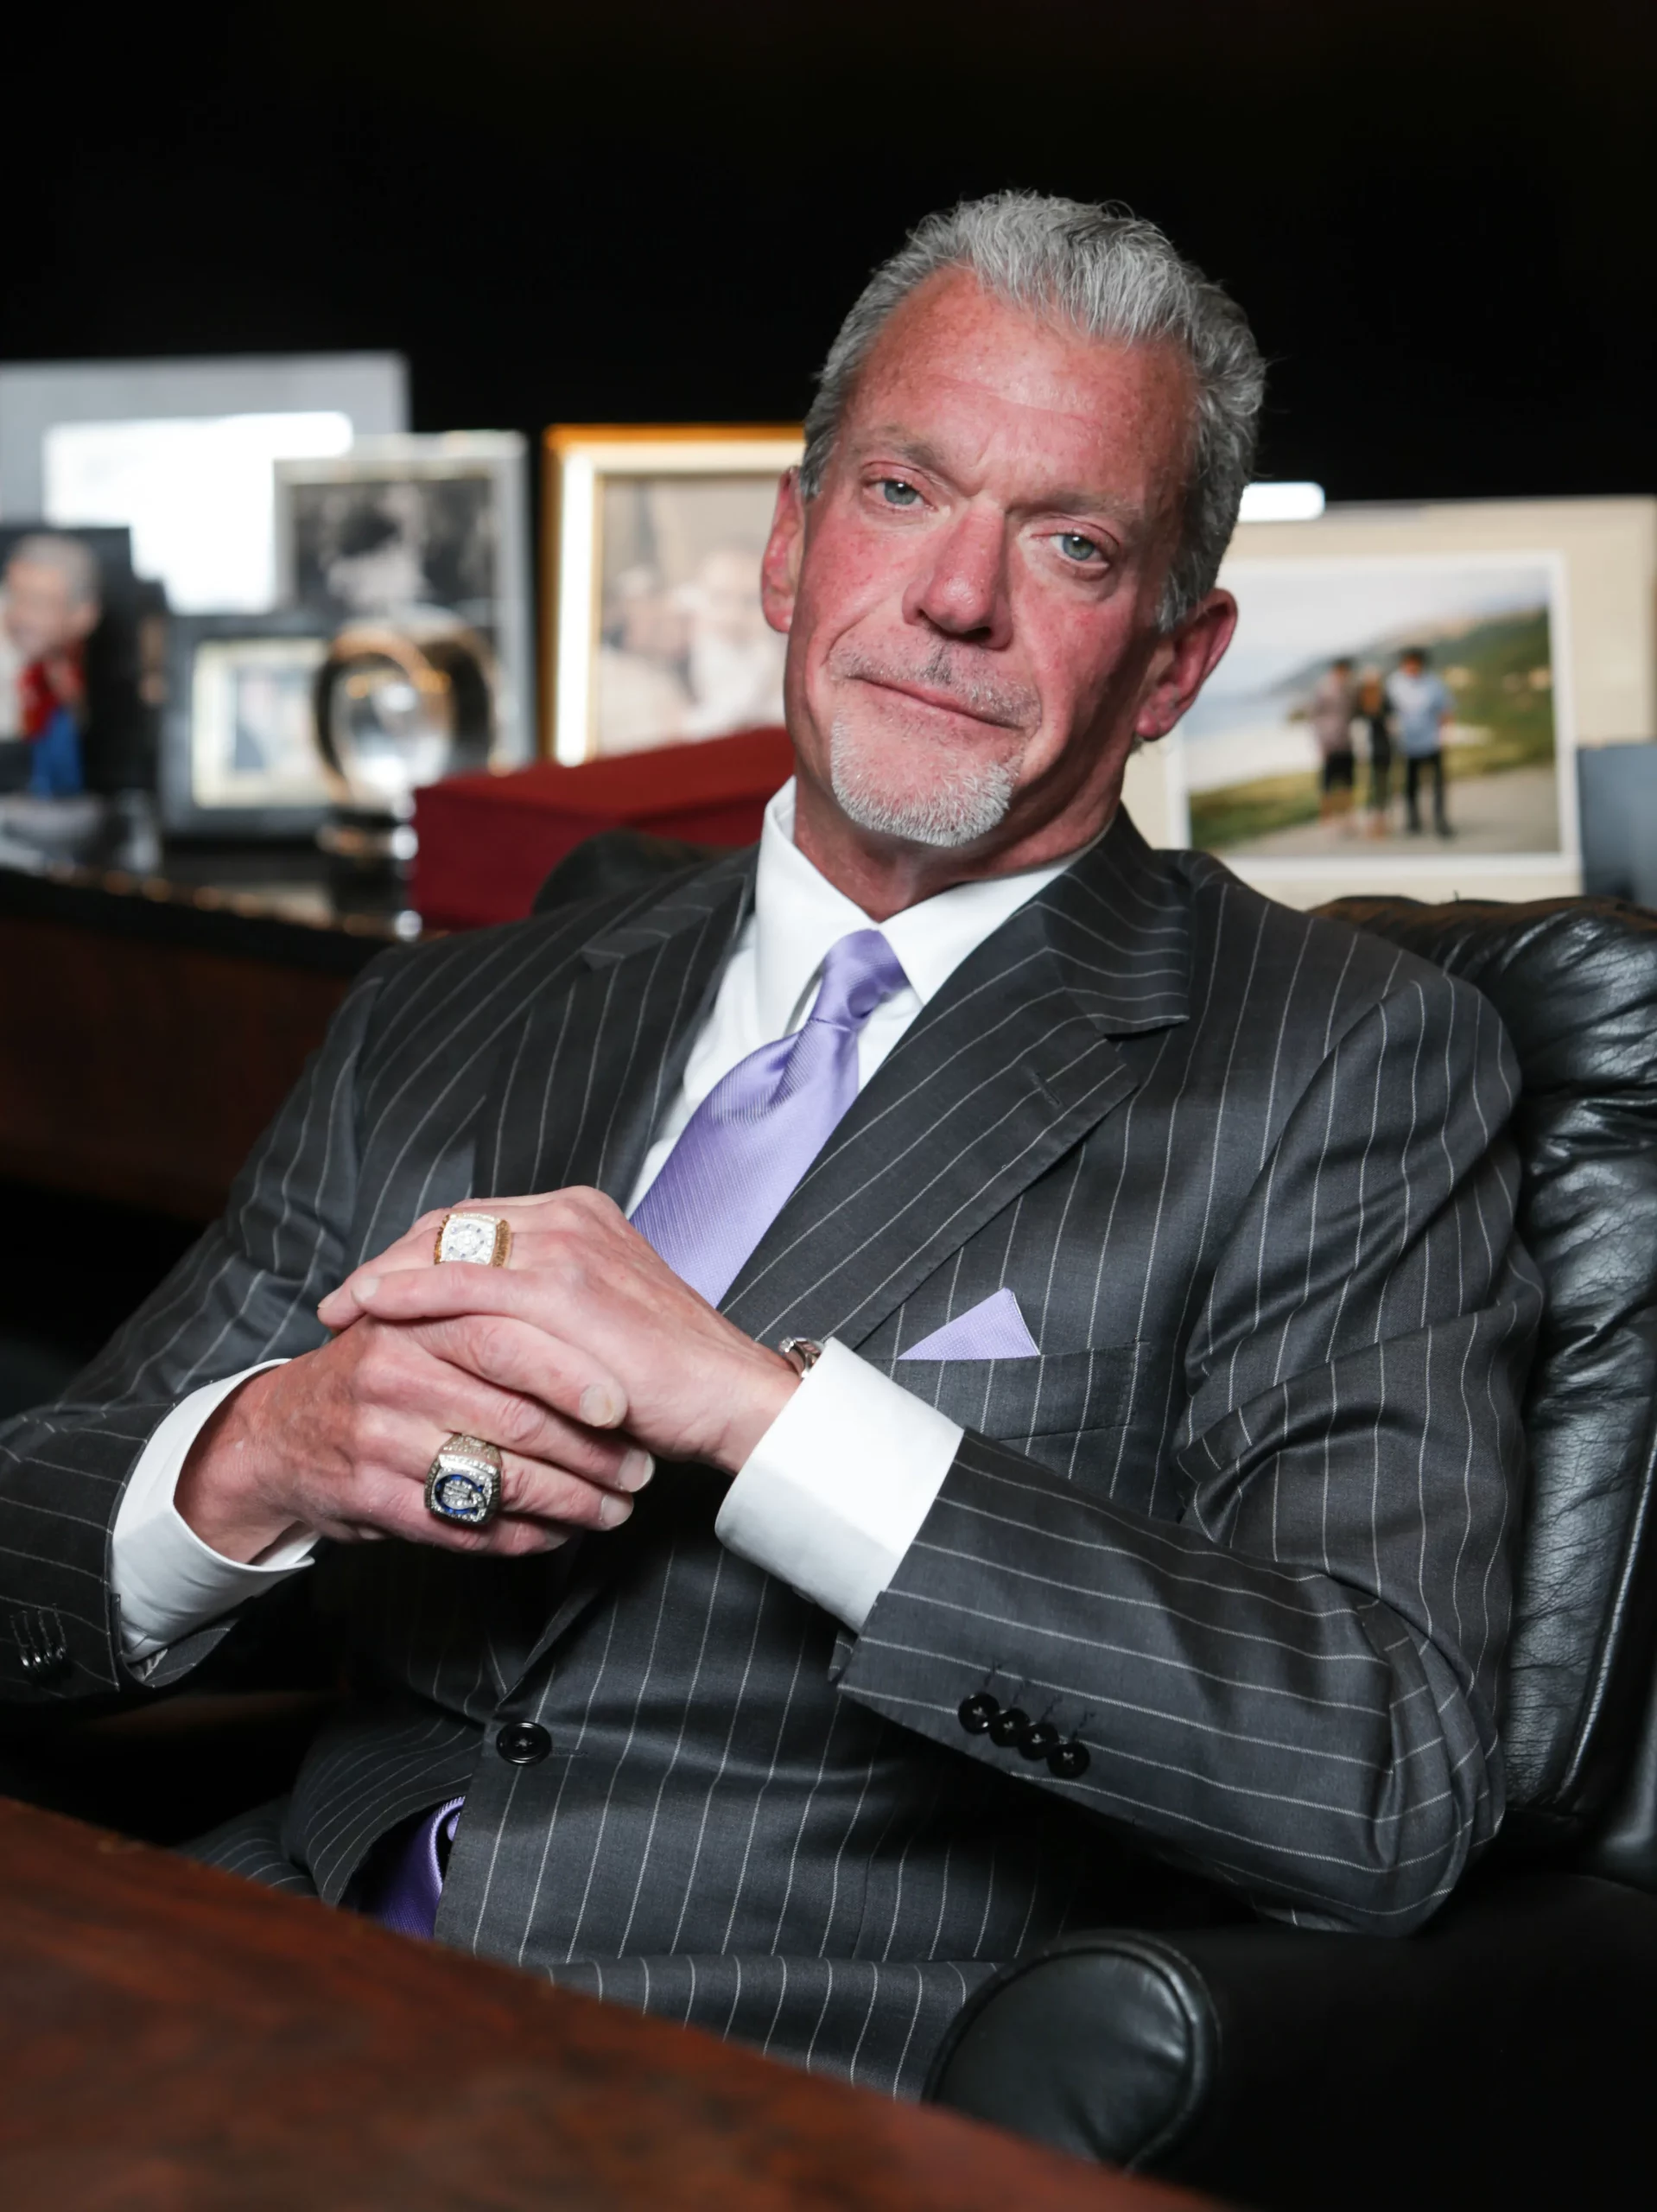 Jim Irsay's Net Worth, Awards, Endorsements, Achievements, Contracts